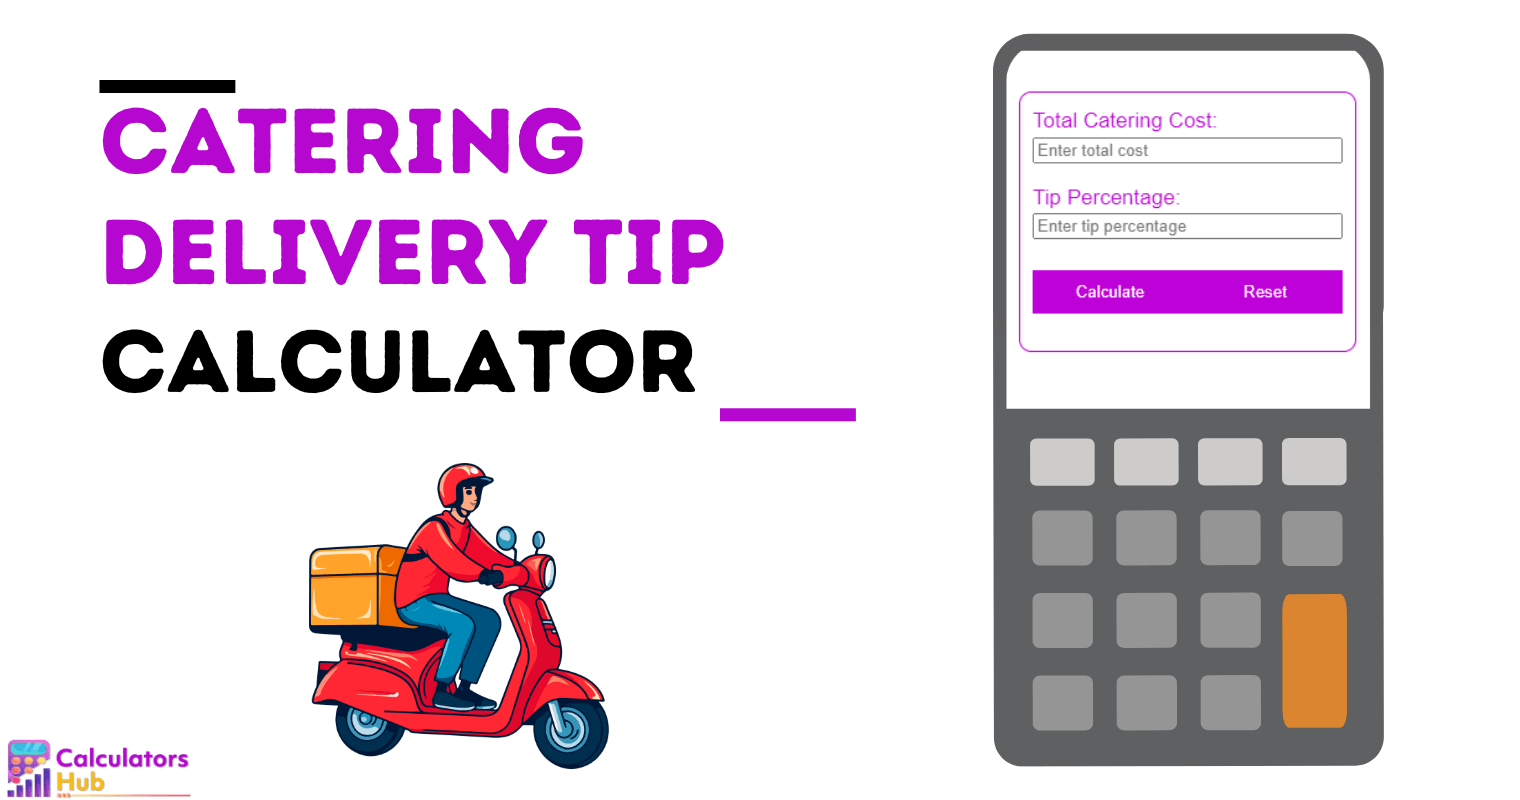 Catering Delivery Tip Calculator